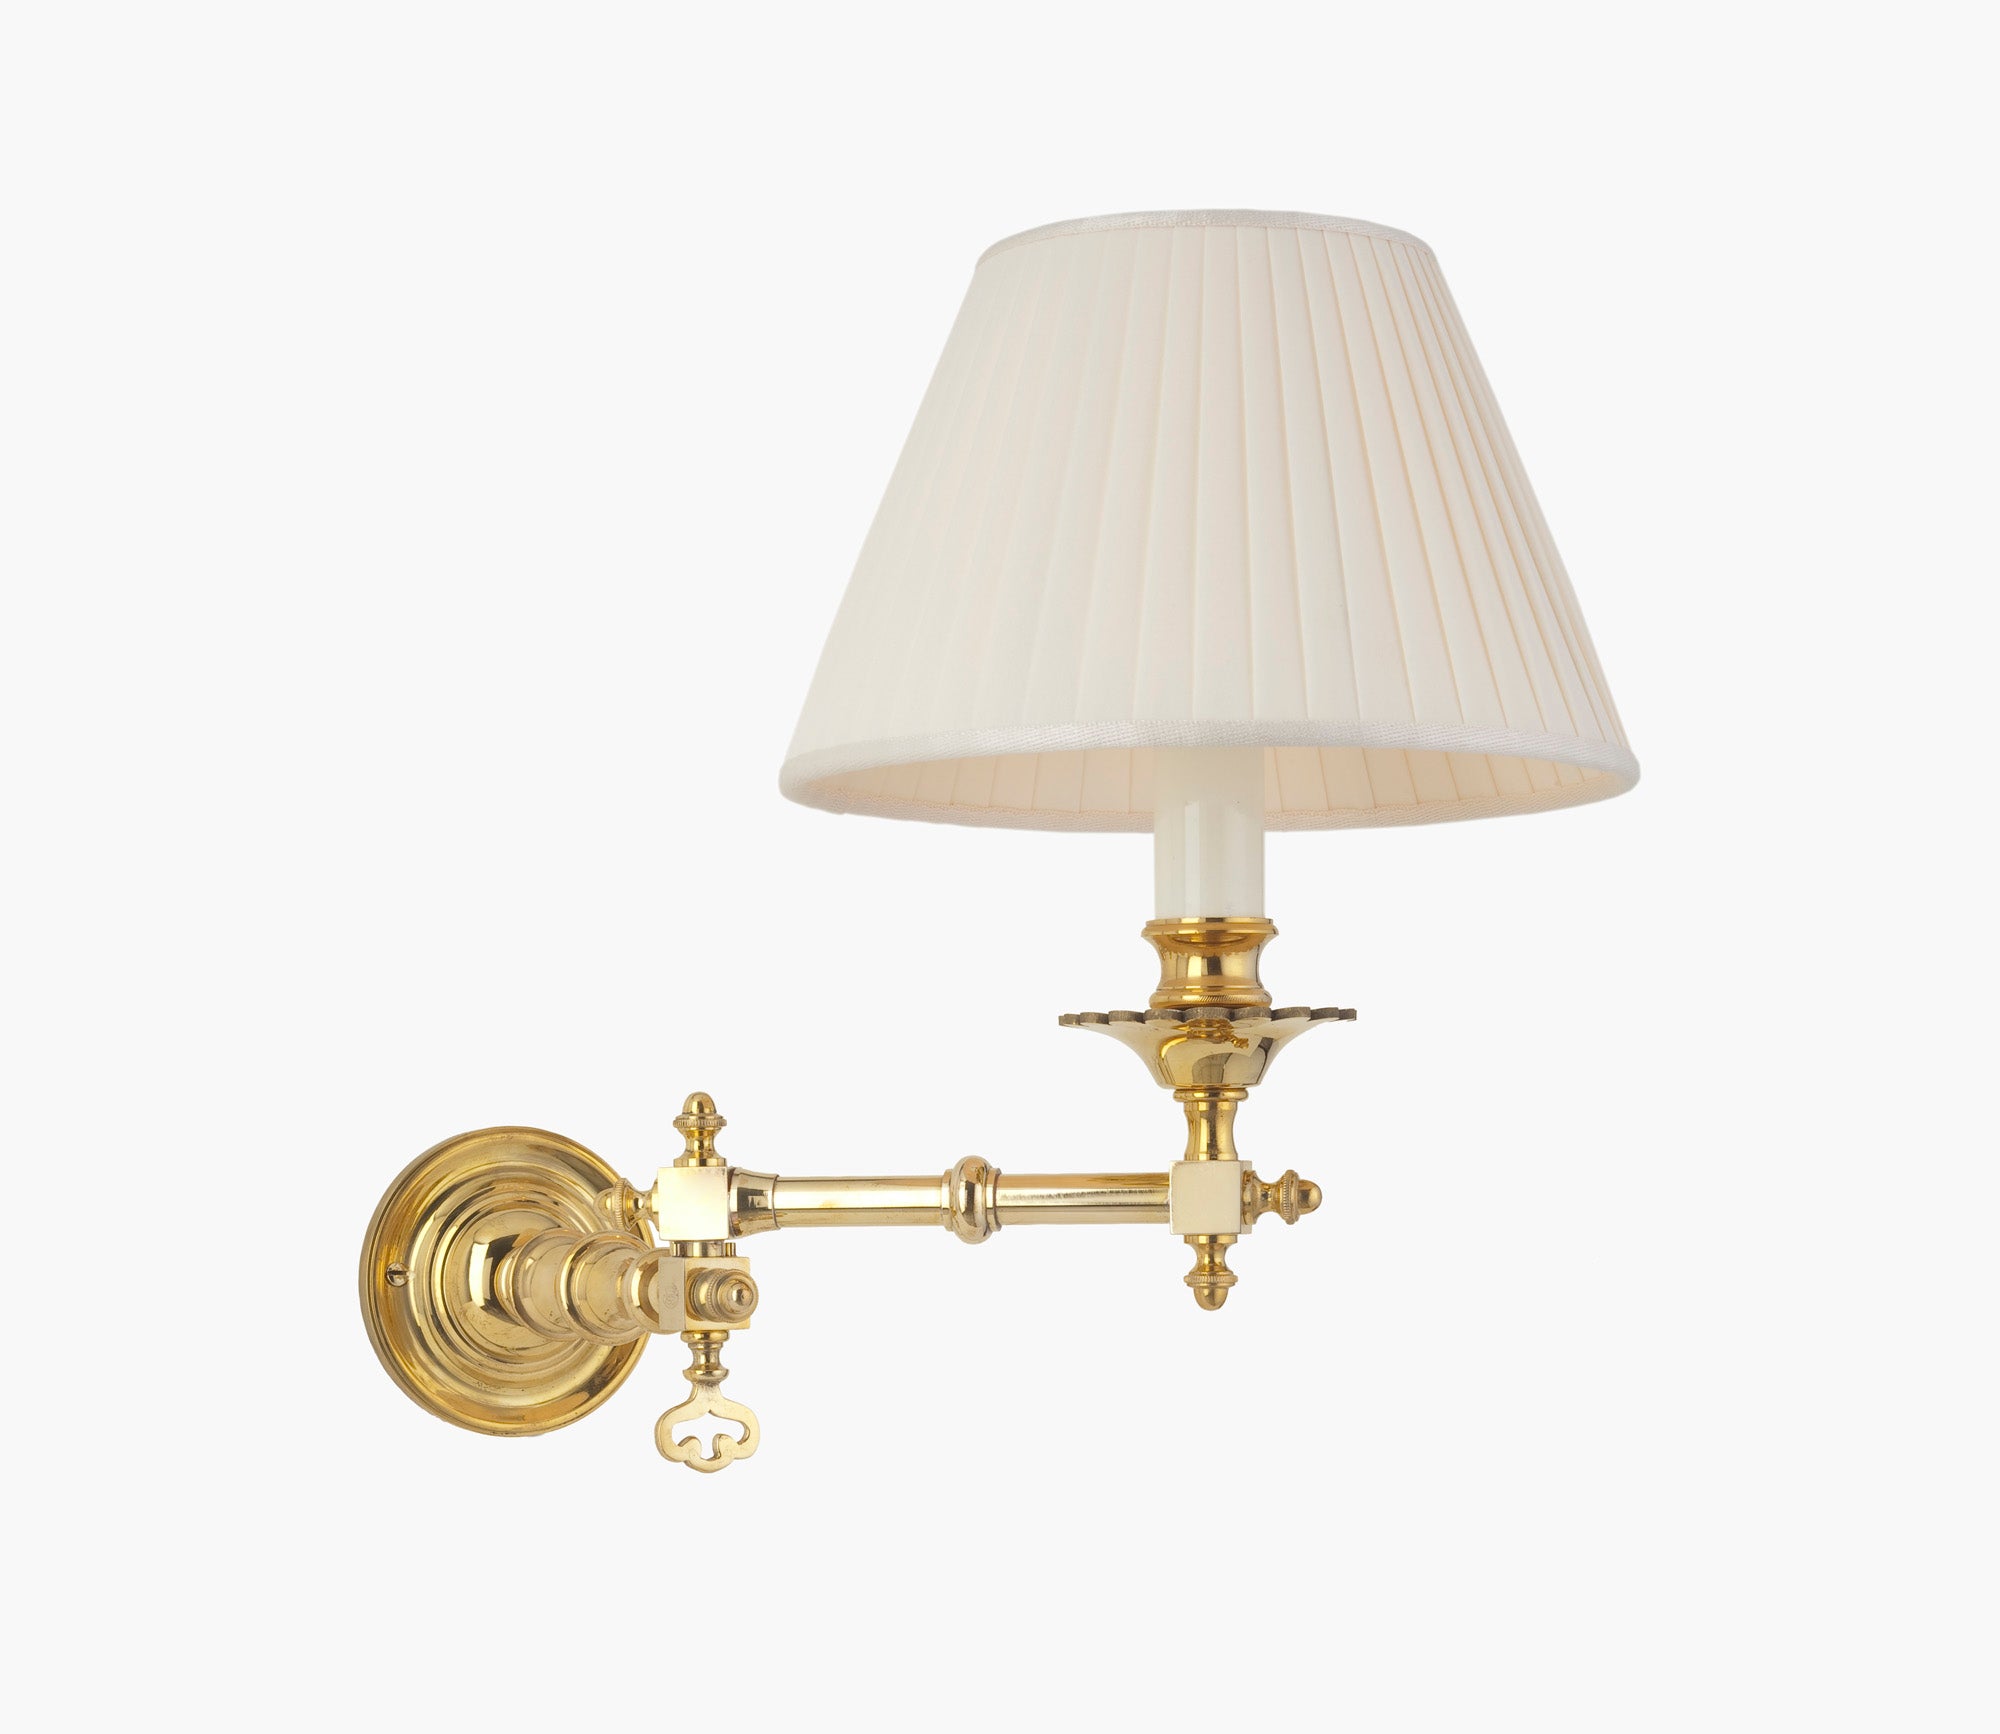 Key and Knuckle Wall Light Product Image 1